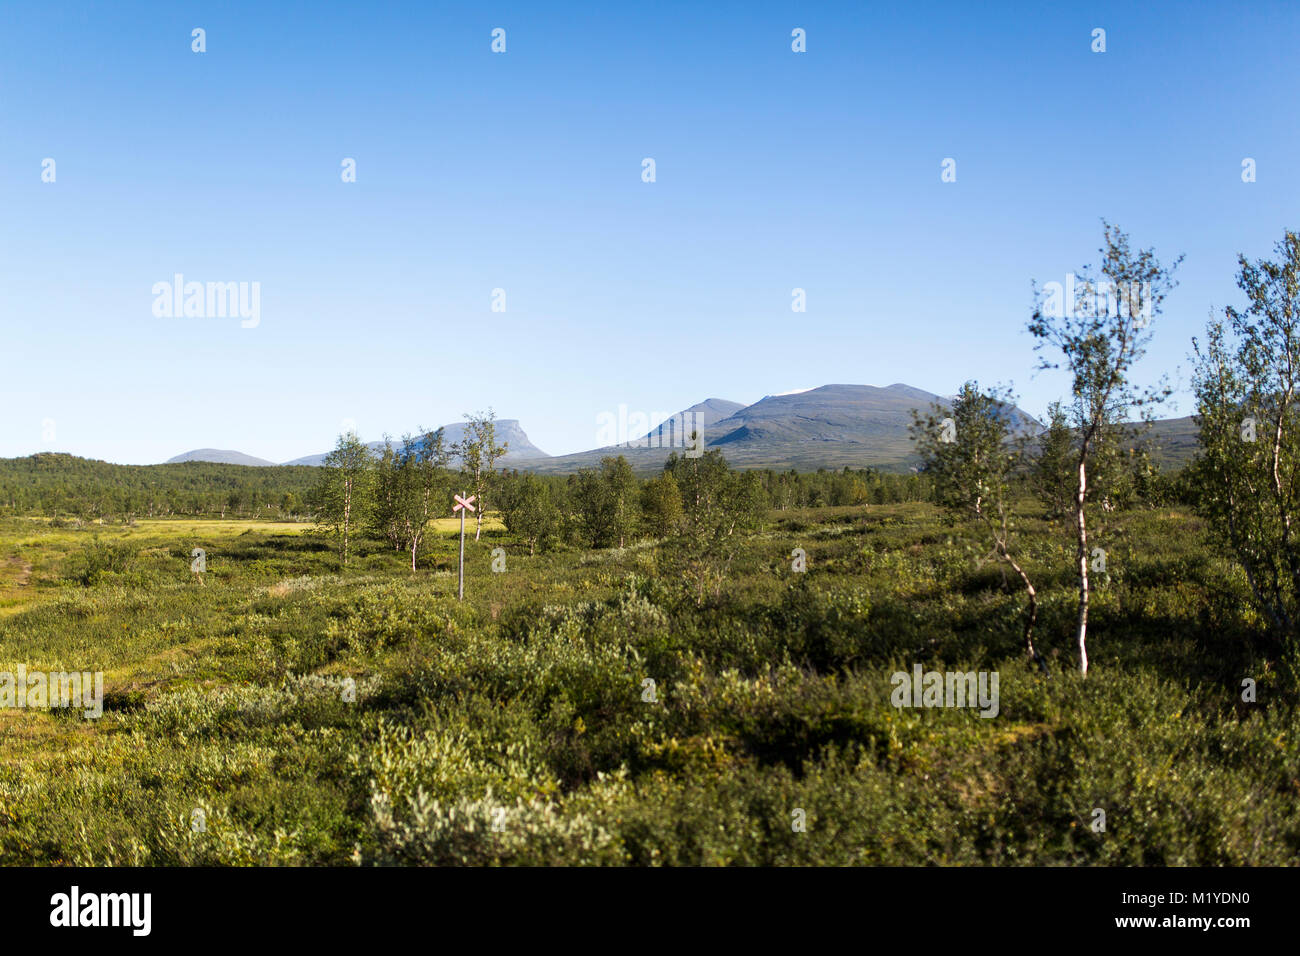 Lapporten, a mountain pass in Lapland, Sweden viewed from far away. A red cross marks out the walking trail in the wild nature. Stock Photo